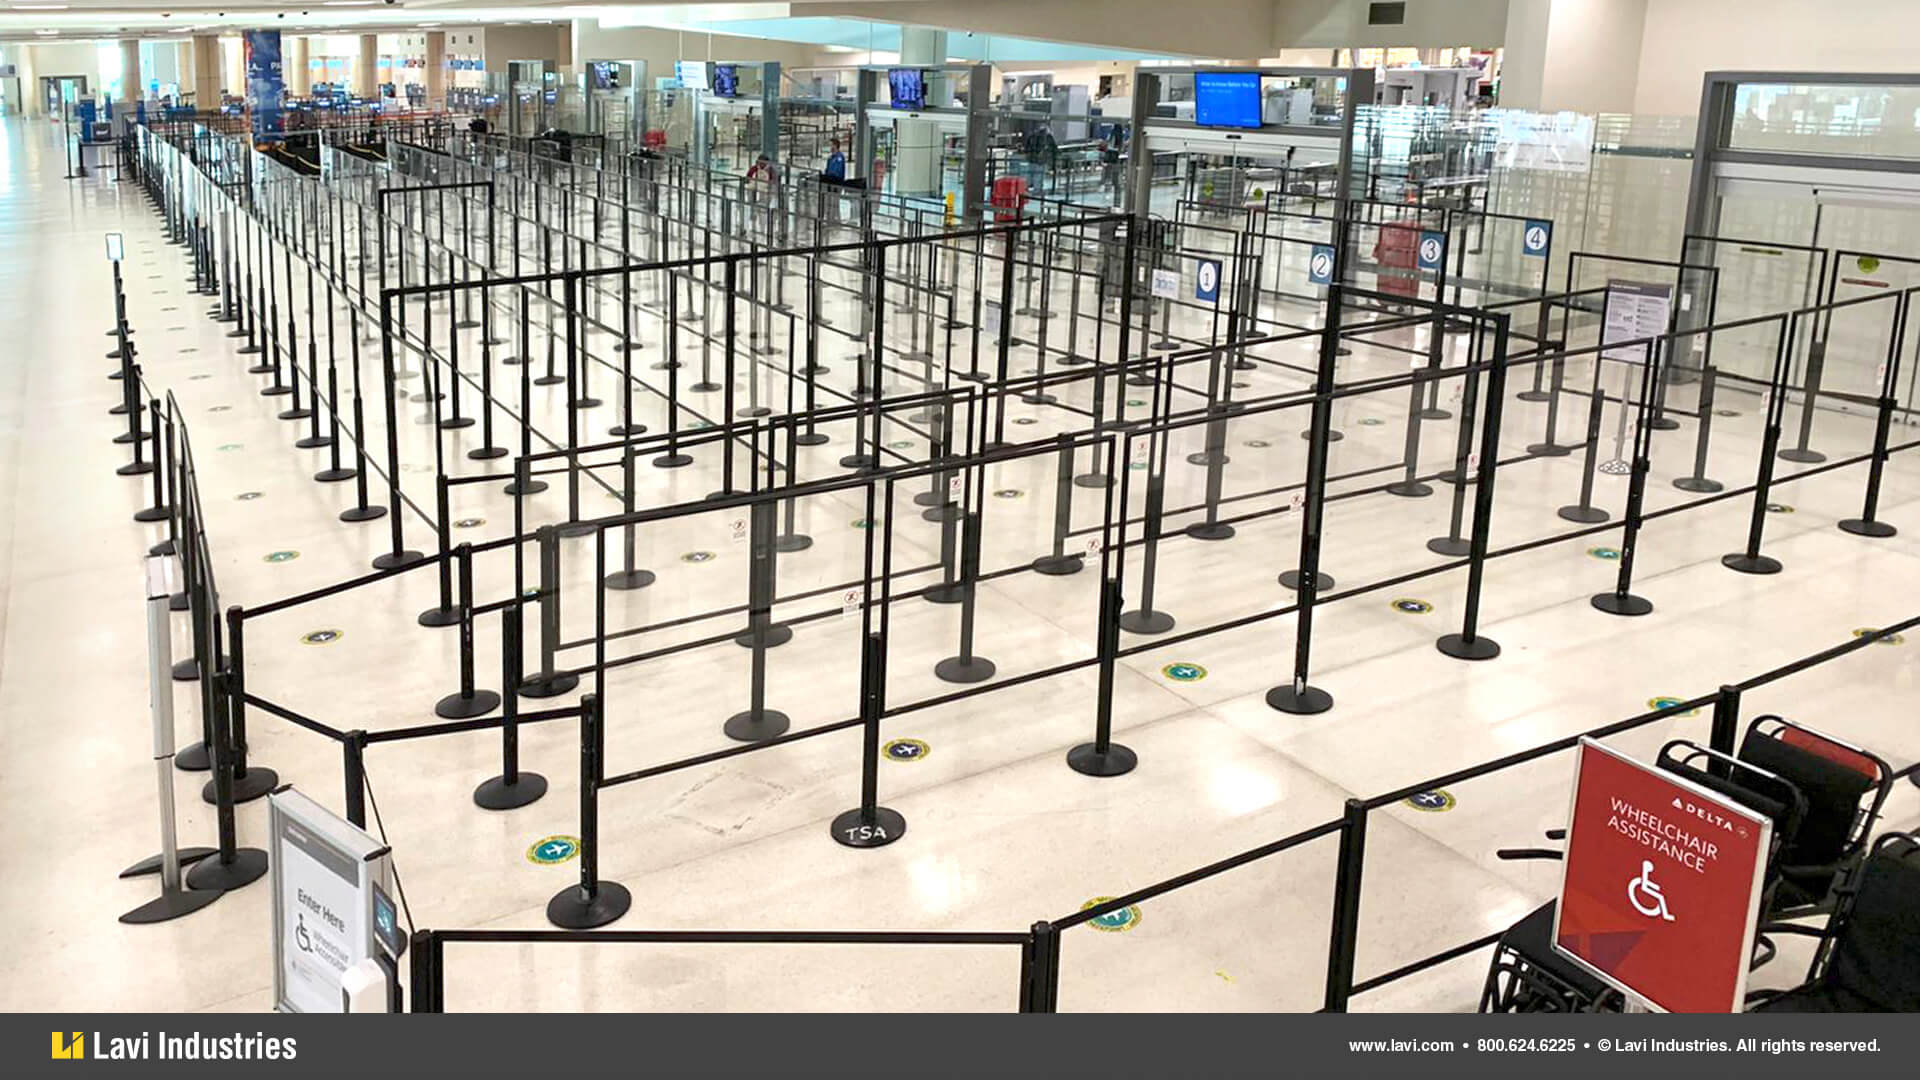 Airport,Government,Barriers,Queuing,Security,SocialDistancing,Directrac,RigidRail,Stanchions,QueueGuard